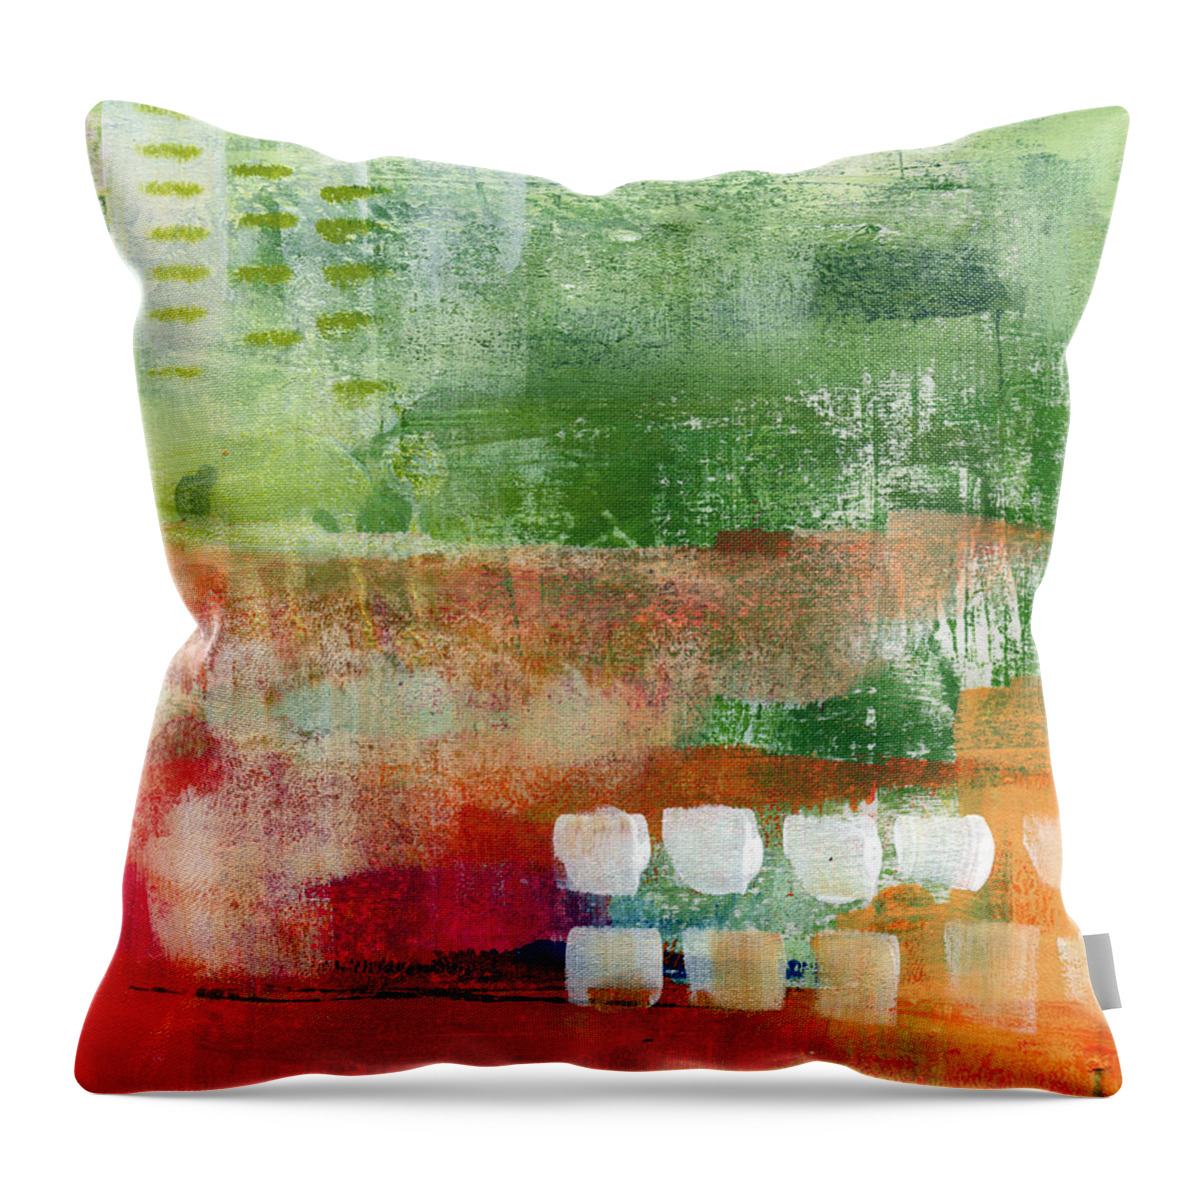 Abstract Throw Pillow featuring the mixed media Abstract Spring- Art by Linda Woods by Linda Woods